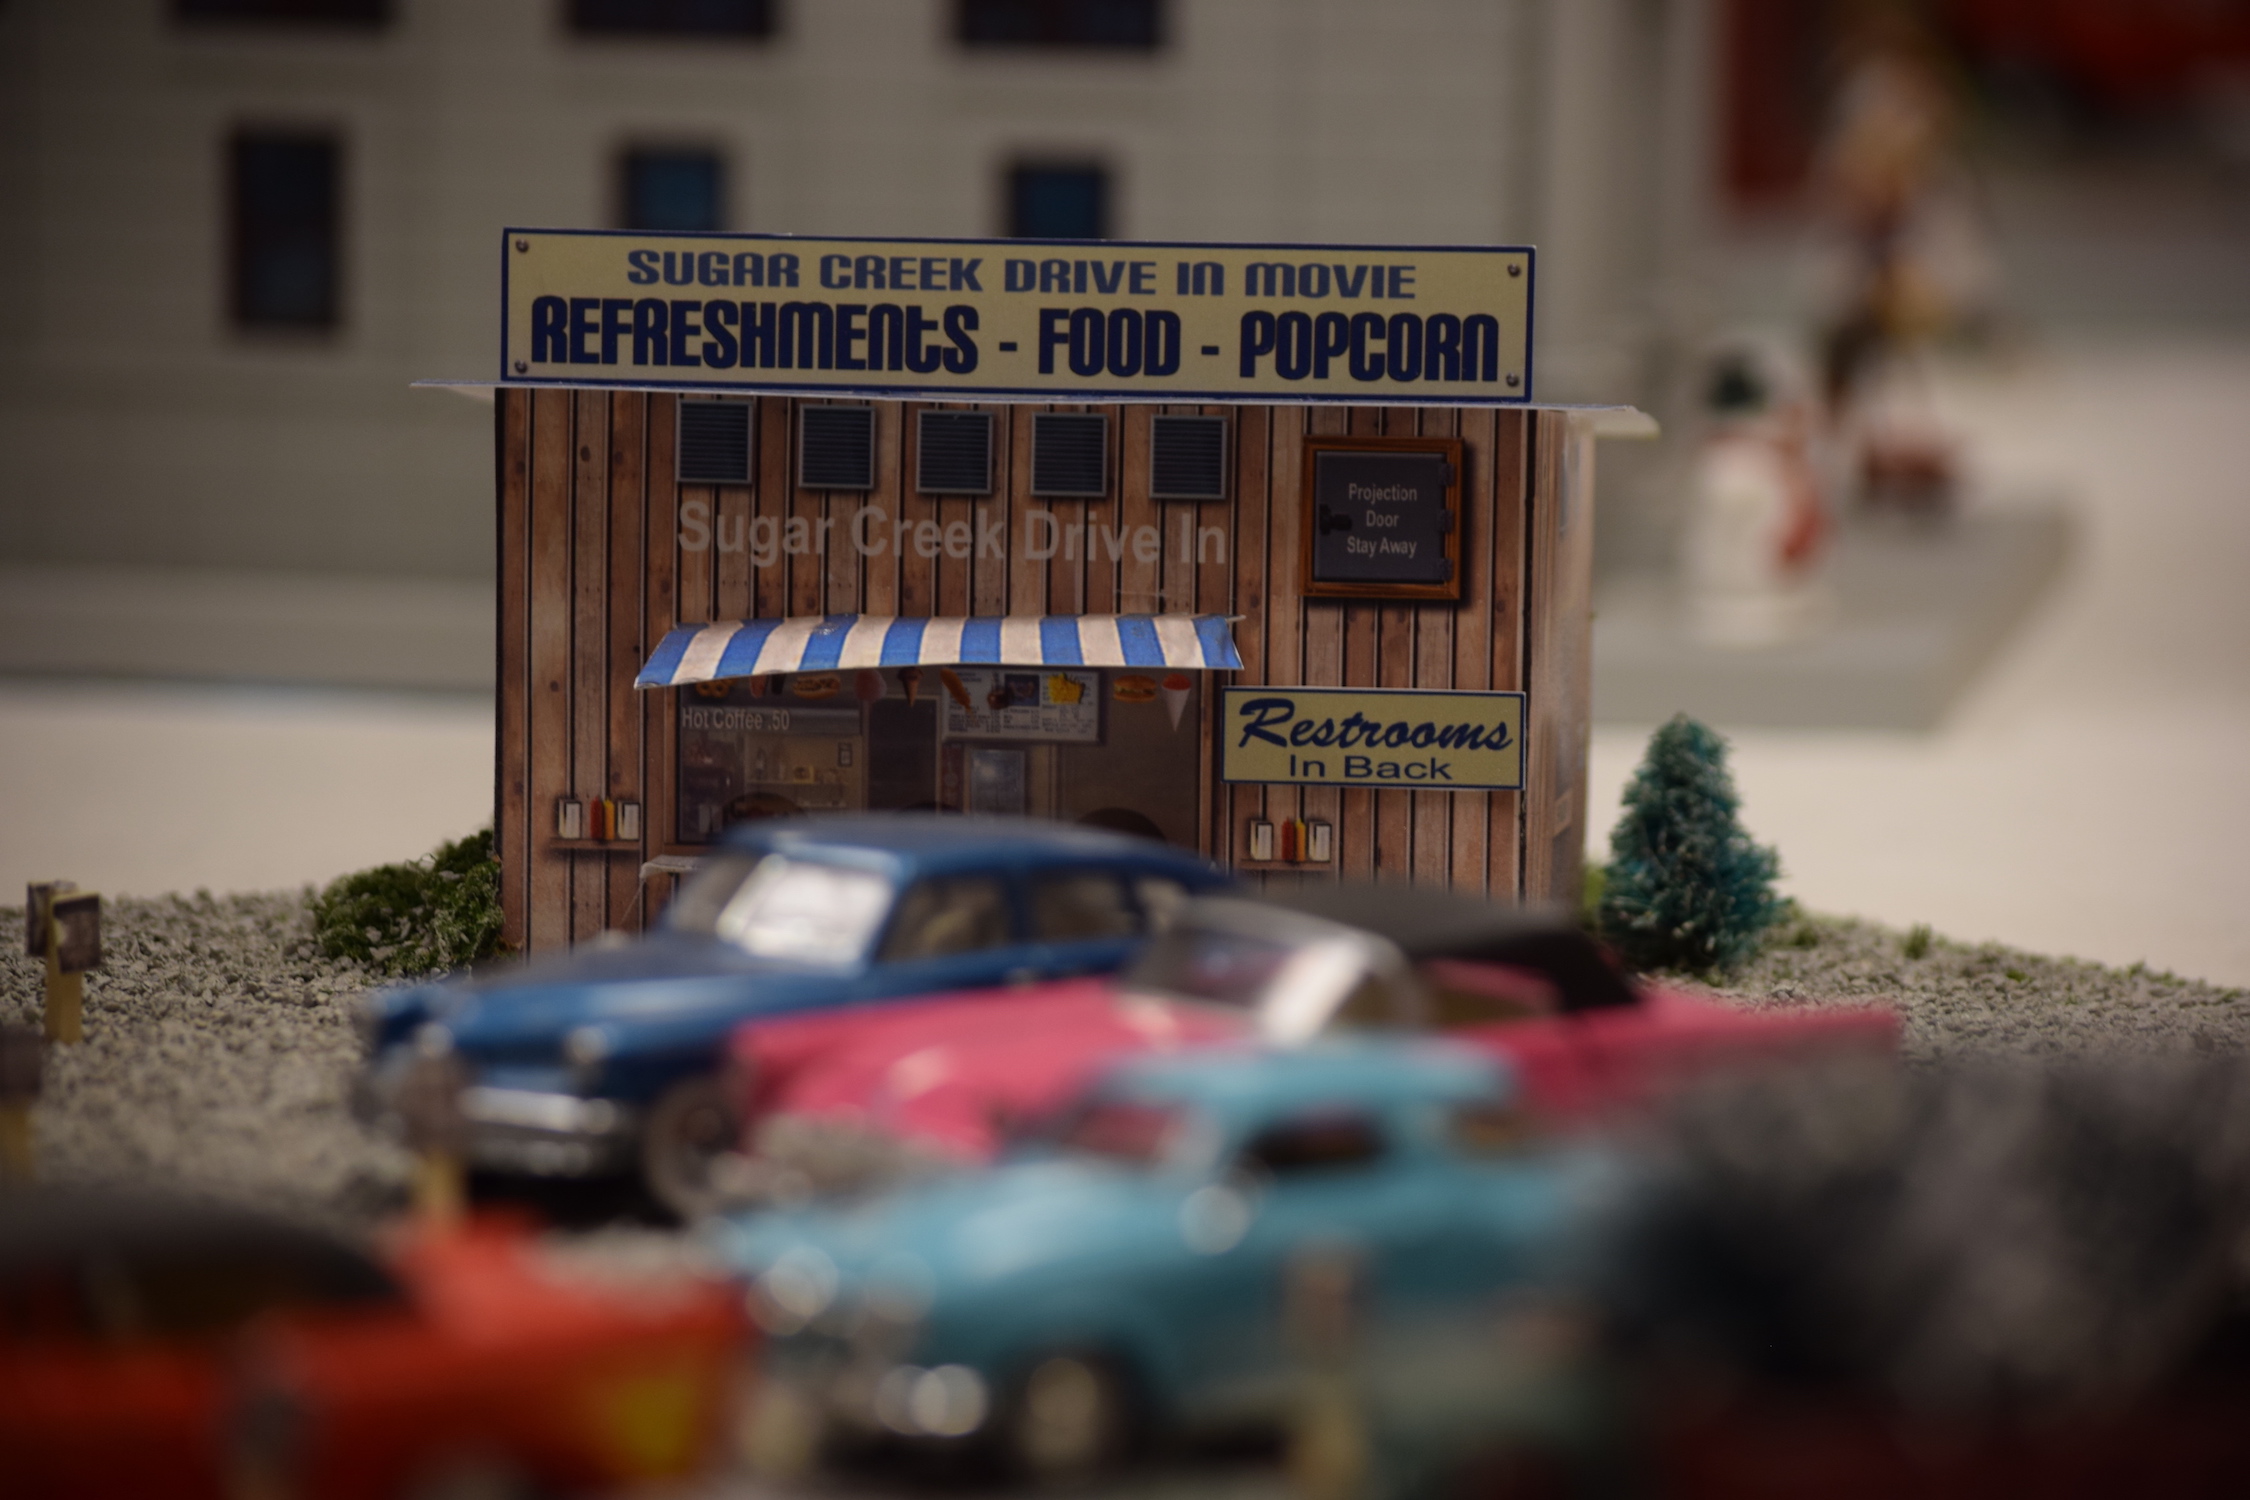 A drive-in movie scene with automobiles and a refreshment stand - "Christmas at the Roundhouse" model train display.